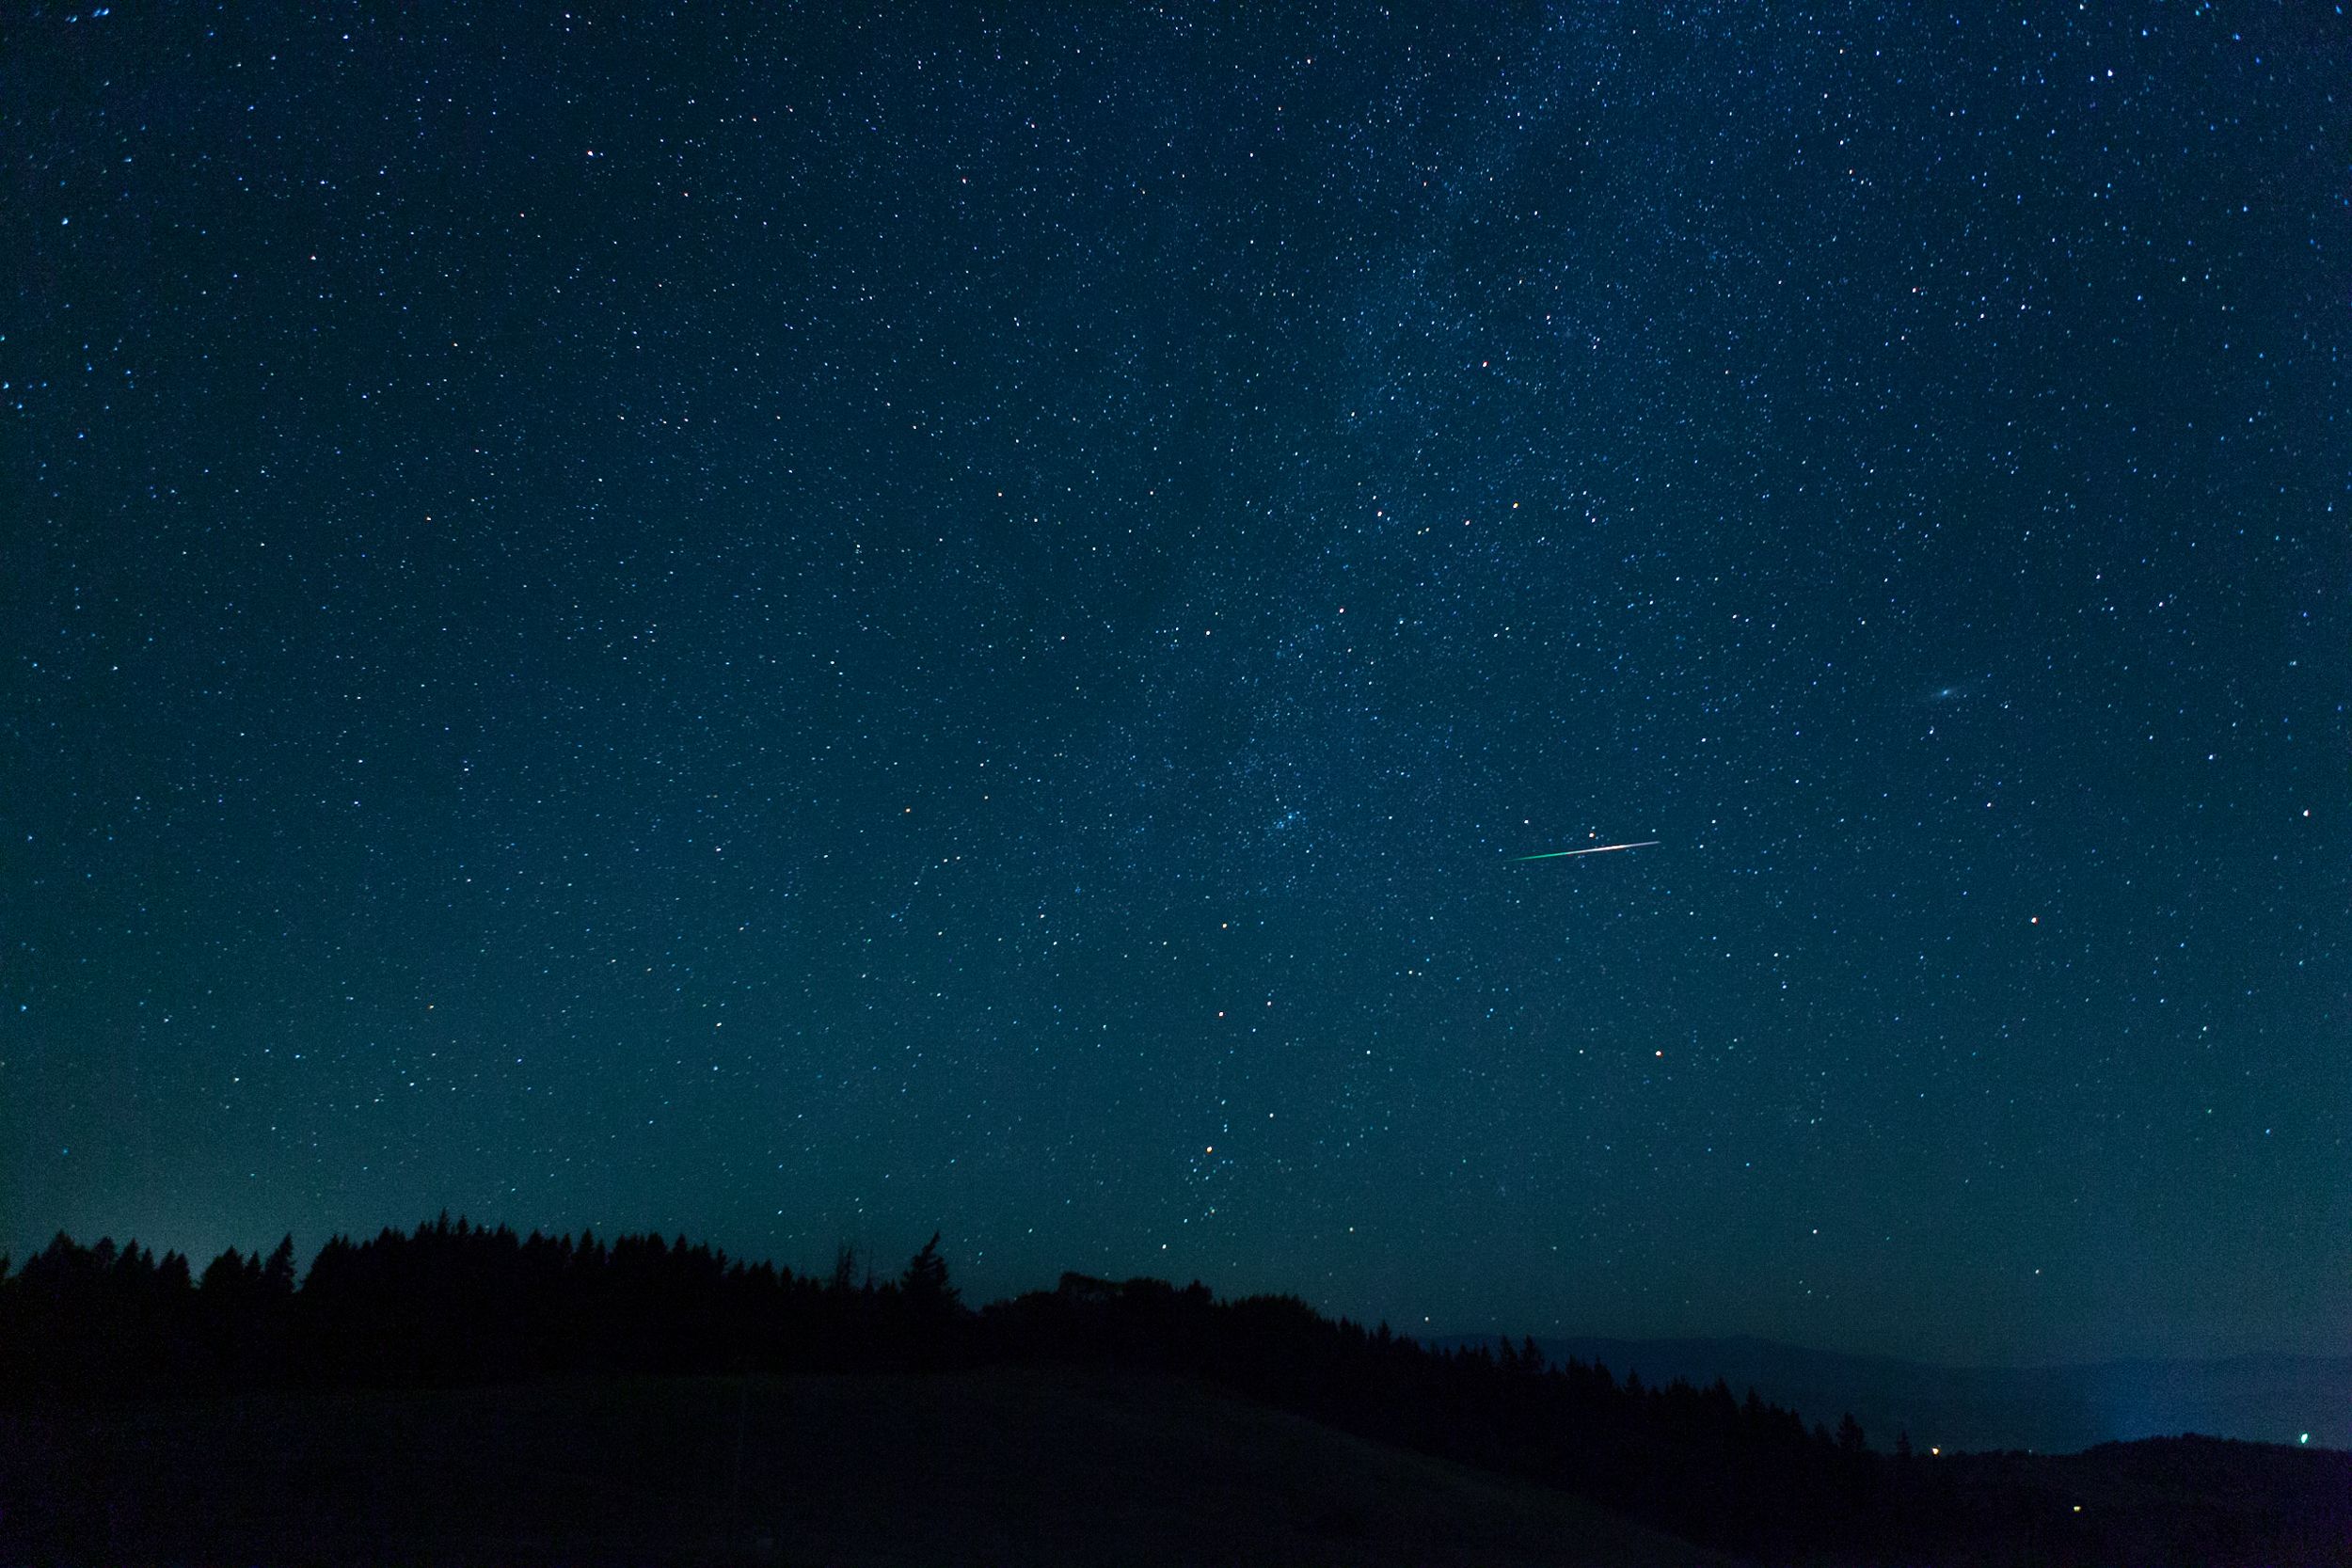 The Perseids Meteor shower as seen from Orr Springs Road in Mendocino County